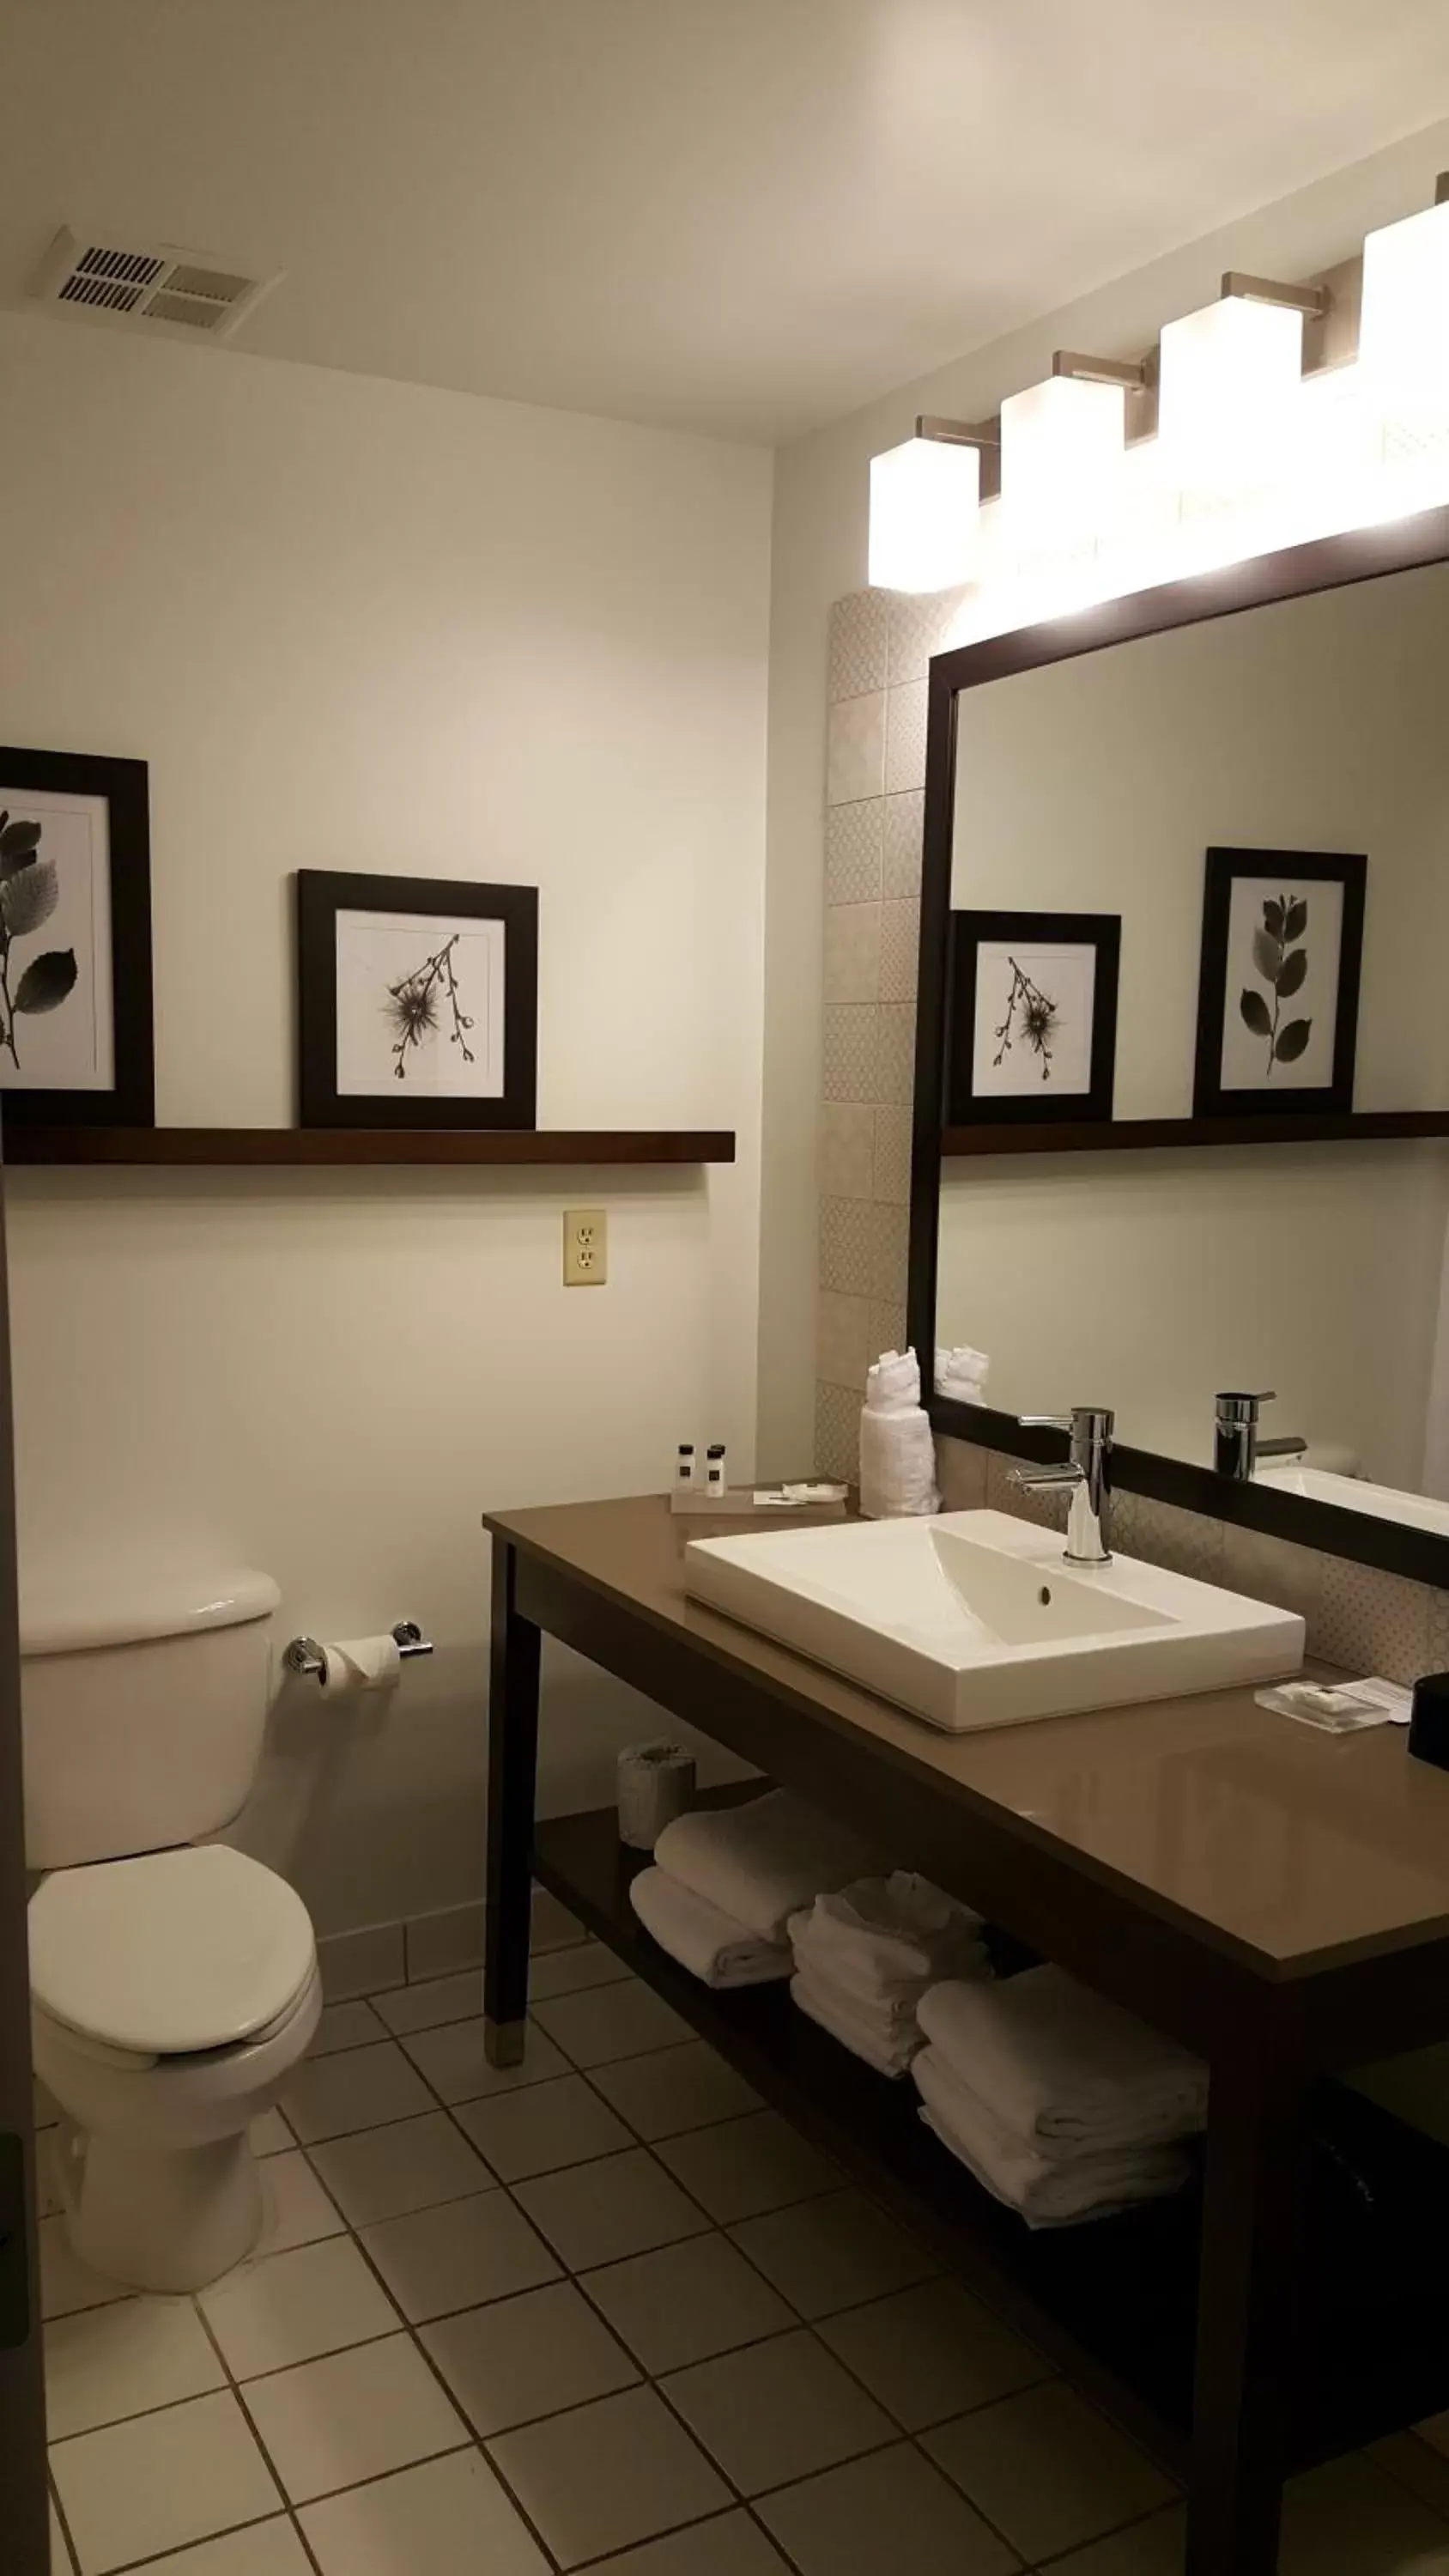 Bathroom in Country Inn & Suites by Radisson, Springfield, OH